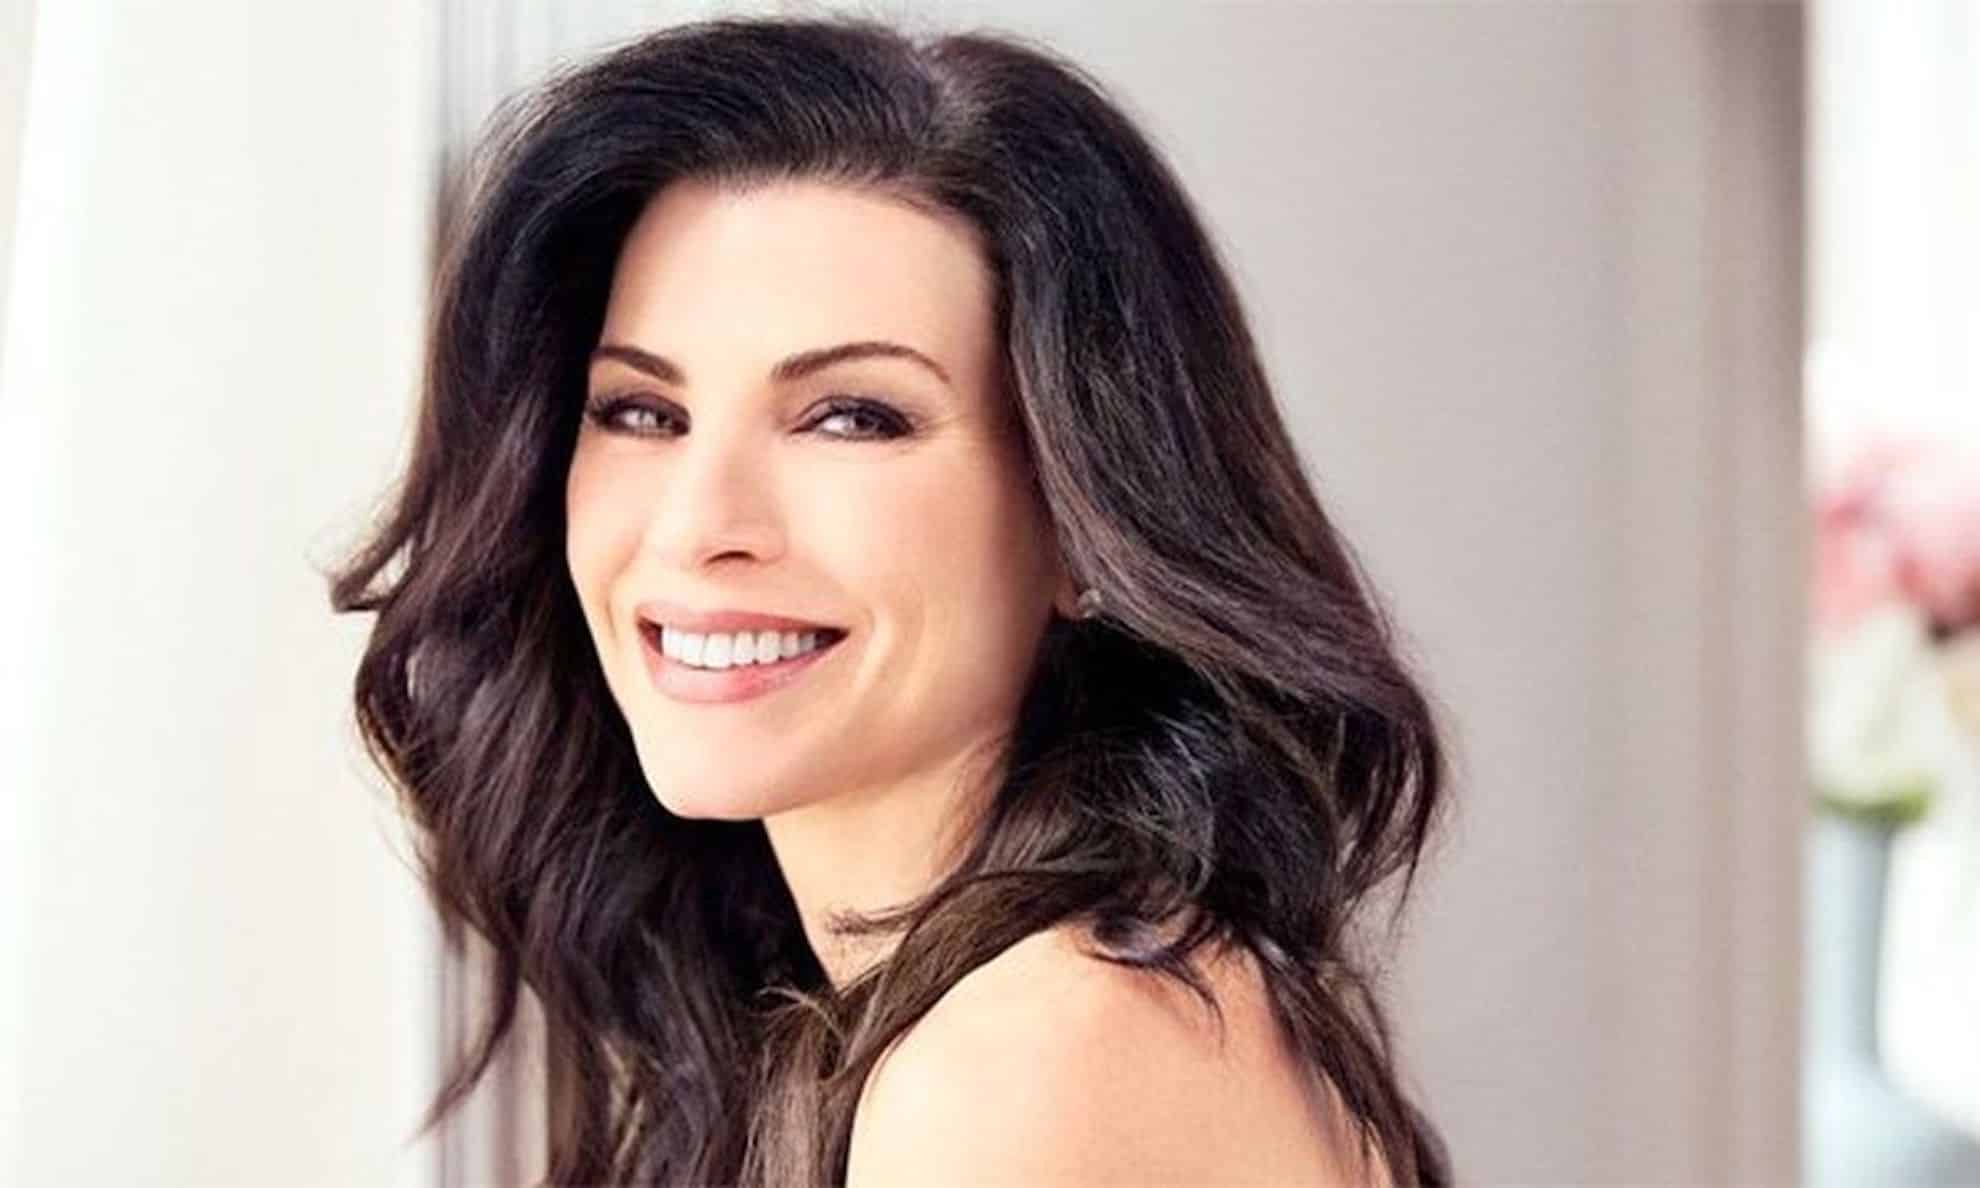 The Morning Show – Stagione 2: nel cast anche Julianna Margulies